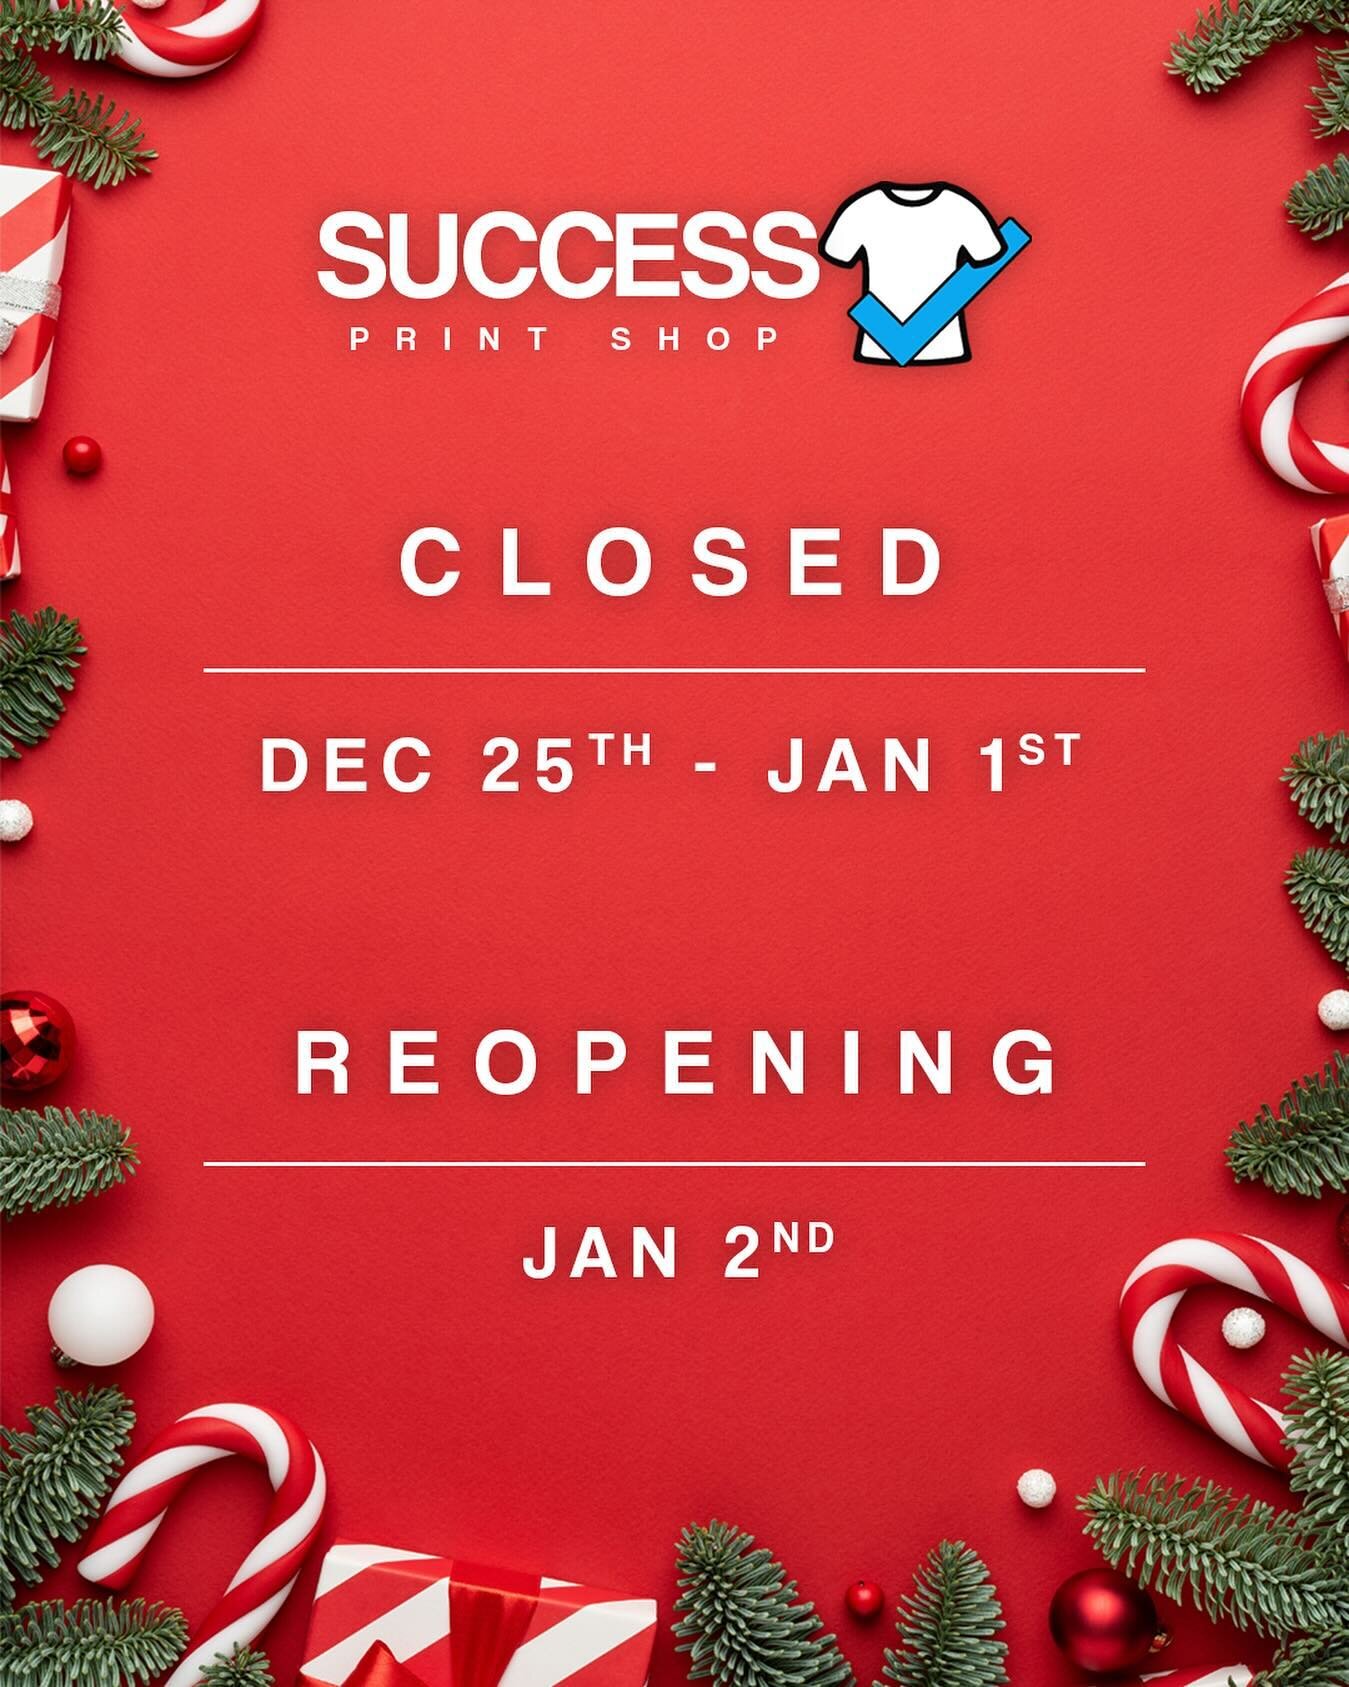 Huge thank you to all of our customers making 2023 a very 𝙎𝙪𝙘𝙘𝙚𝙨𝙨-𝙛𝙪𝙡 year! Success Print Shop will be closed the last week of the year and we look forward to serving you in 2024! Merry Christmas🙏